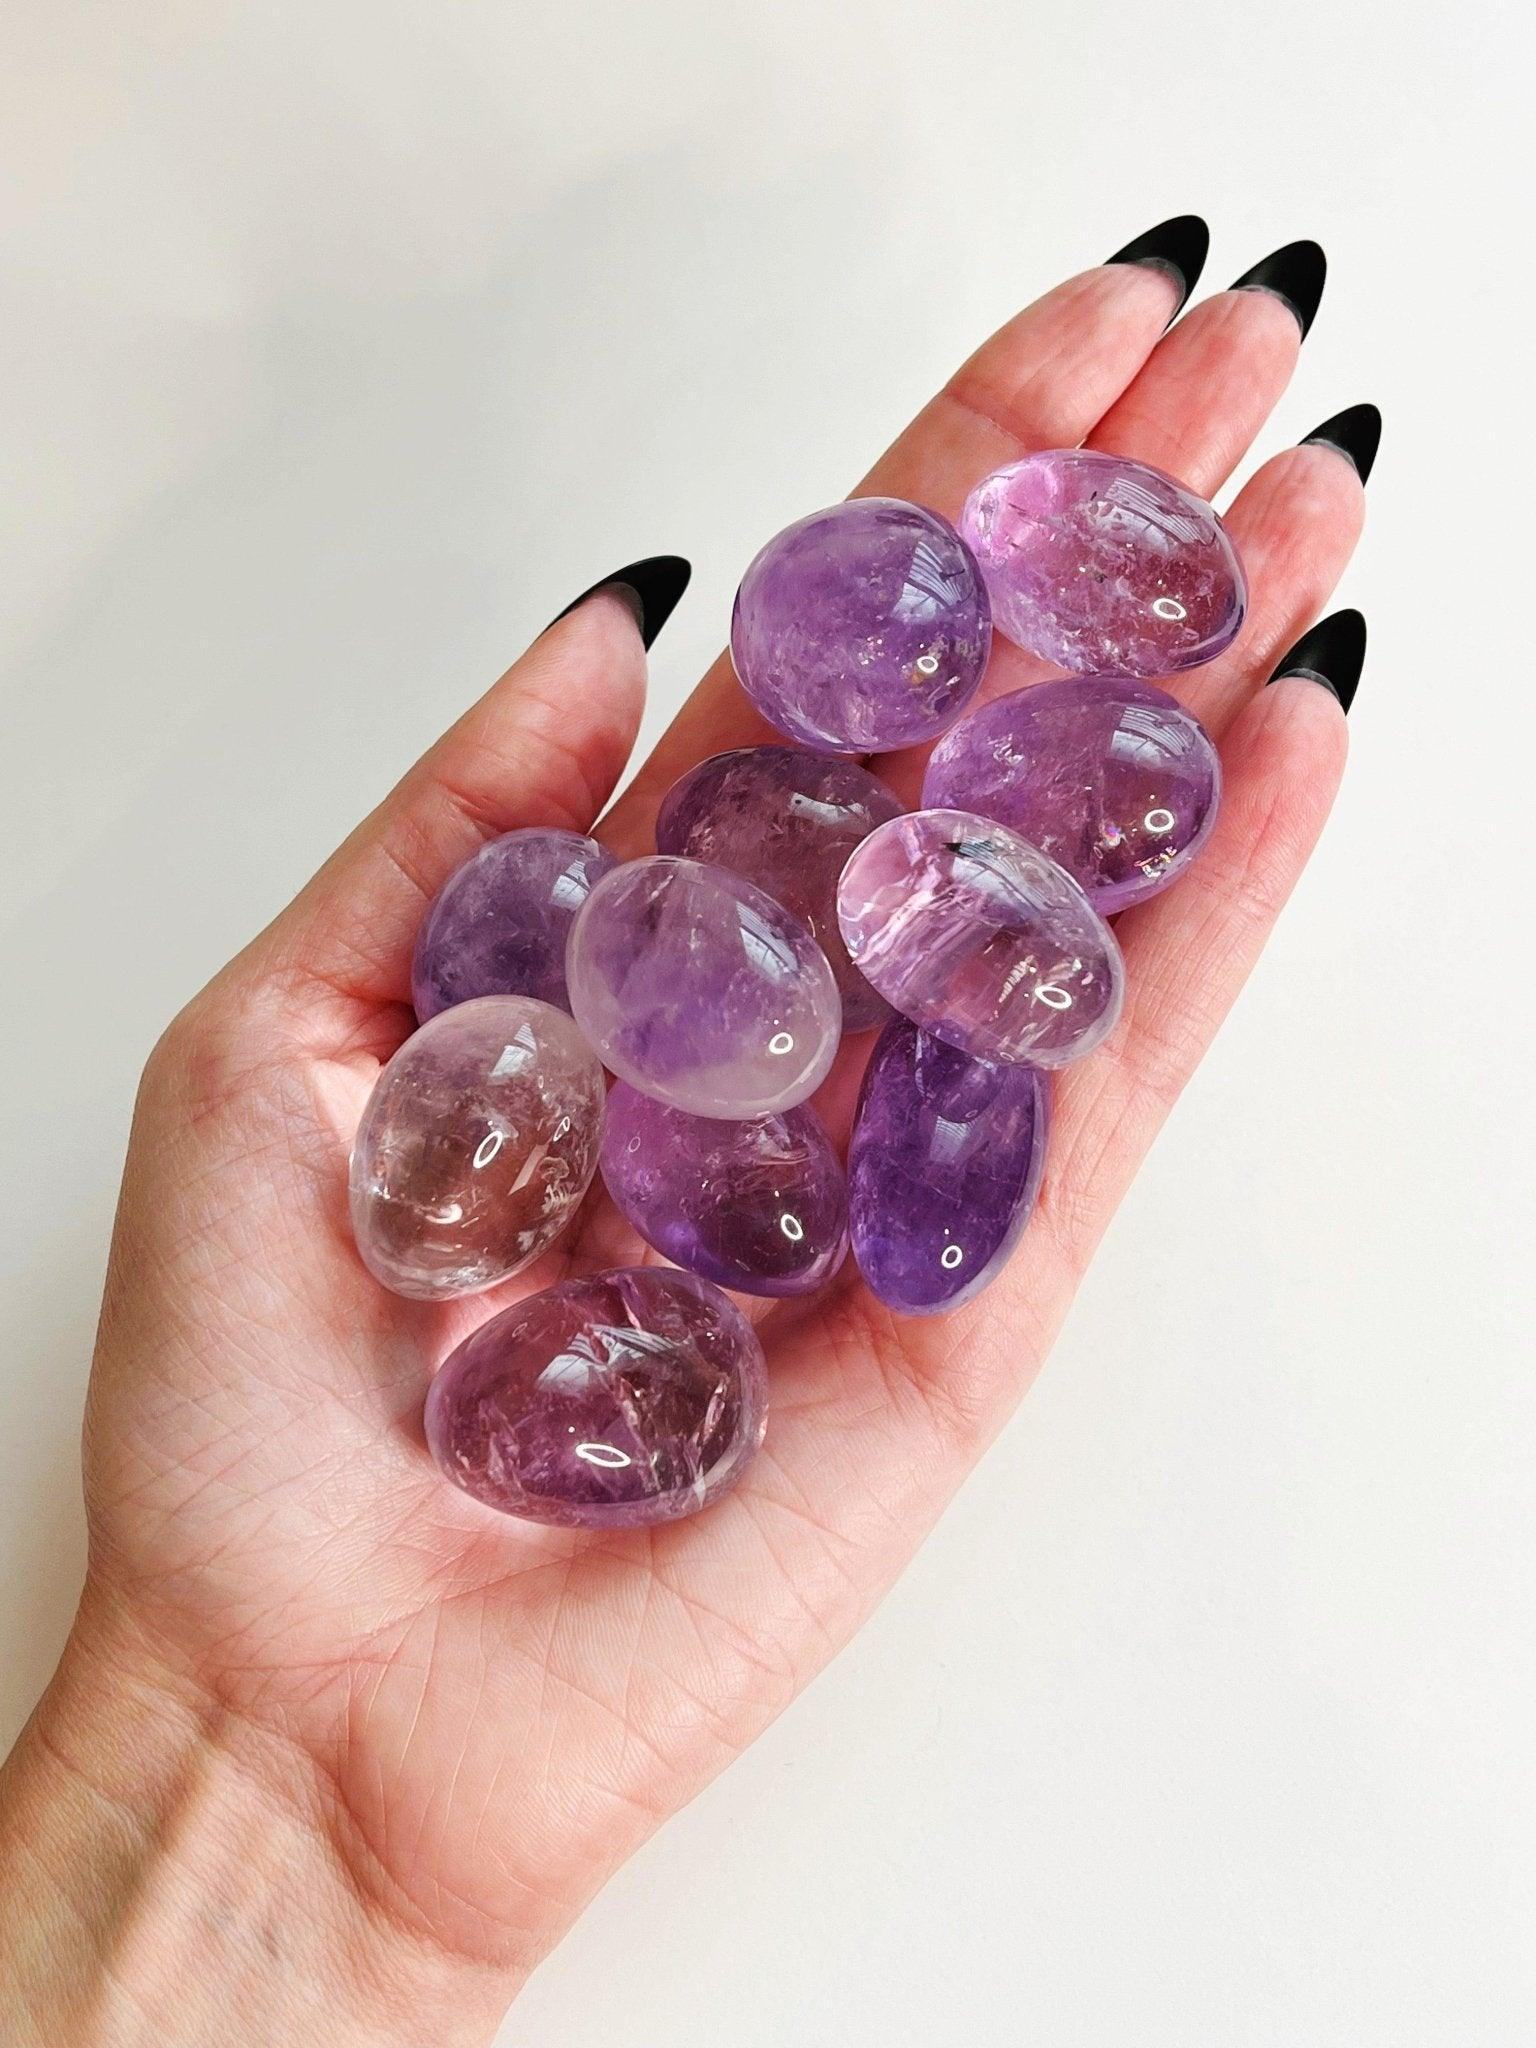 GEMMY AMETHYST CHONK - 33 bday, 444 sale, amethyst, bulk, chonky, emotional support, end of year sale, gemmy amethyst, grief gift bundle, holiday sale, new year sale, pocket crystal, pocket stone, protection gift bundle, spring equinox, tumble, valentine's day - The Mineral Maven